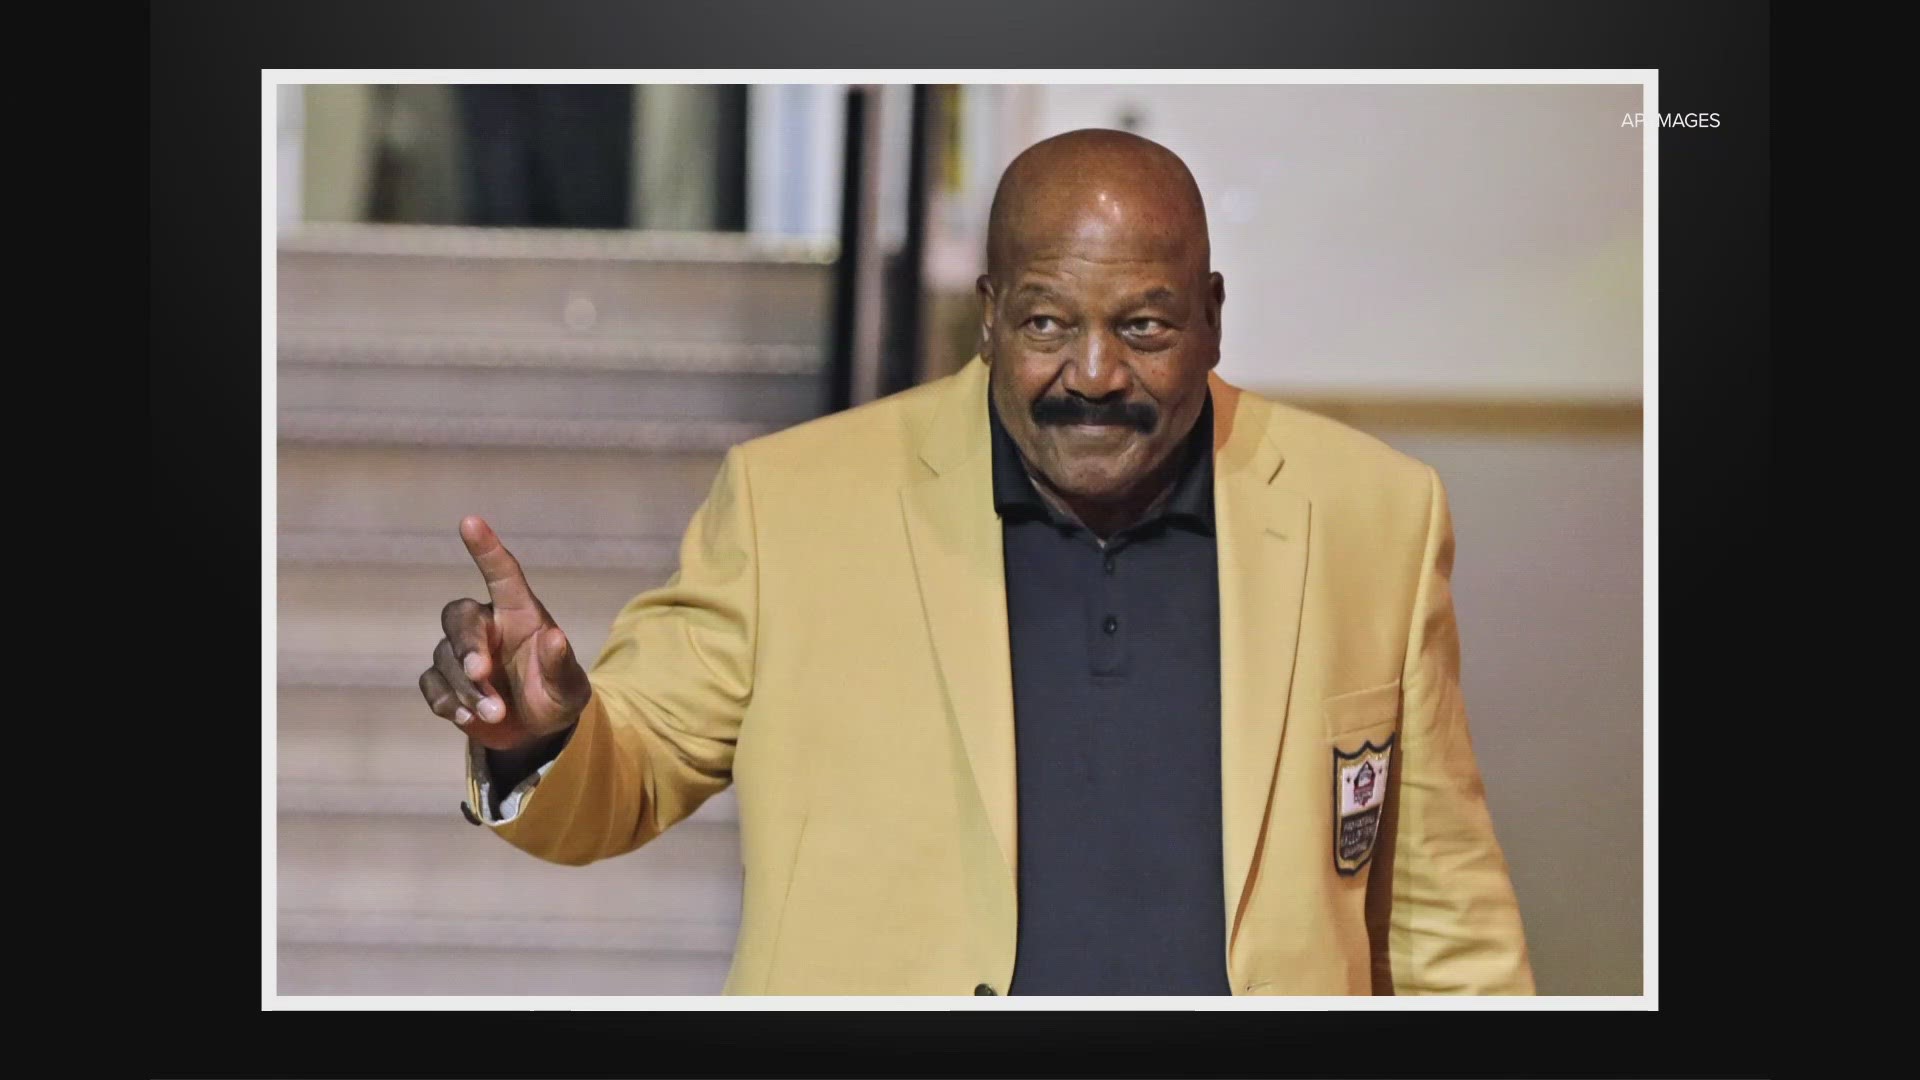 Pro Football Hall of Famer Jim Brown, the unstoppable running back who was also a prominent civil rights advocate during the 1960s, has died.